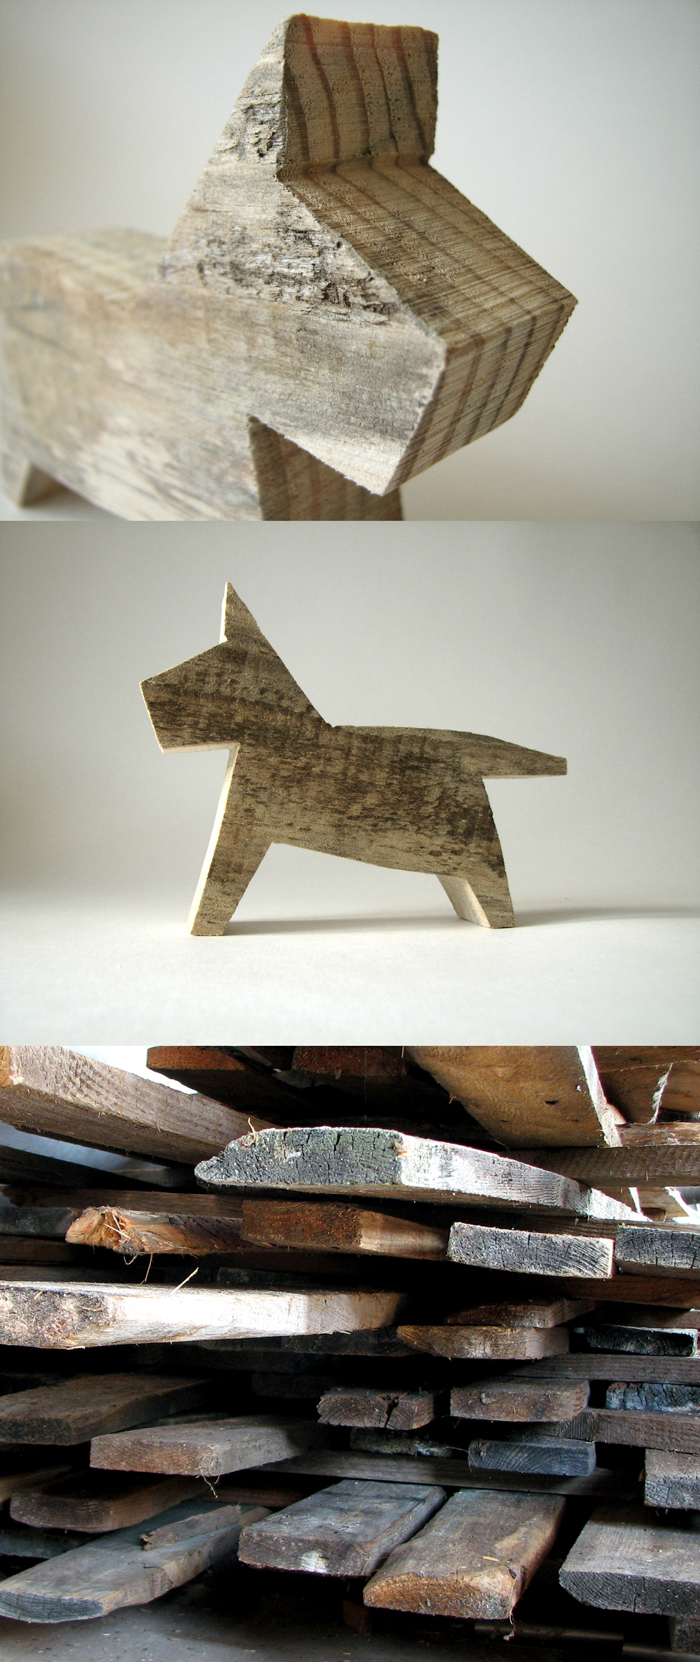 wood recycle pine toy Cat dog animal eco handmade craft woodworking bandsaw rough